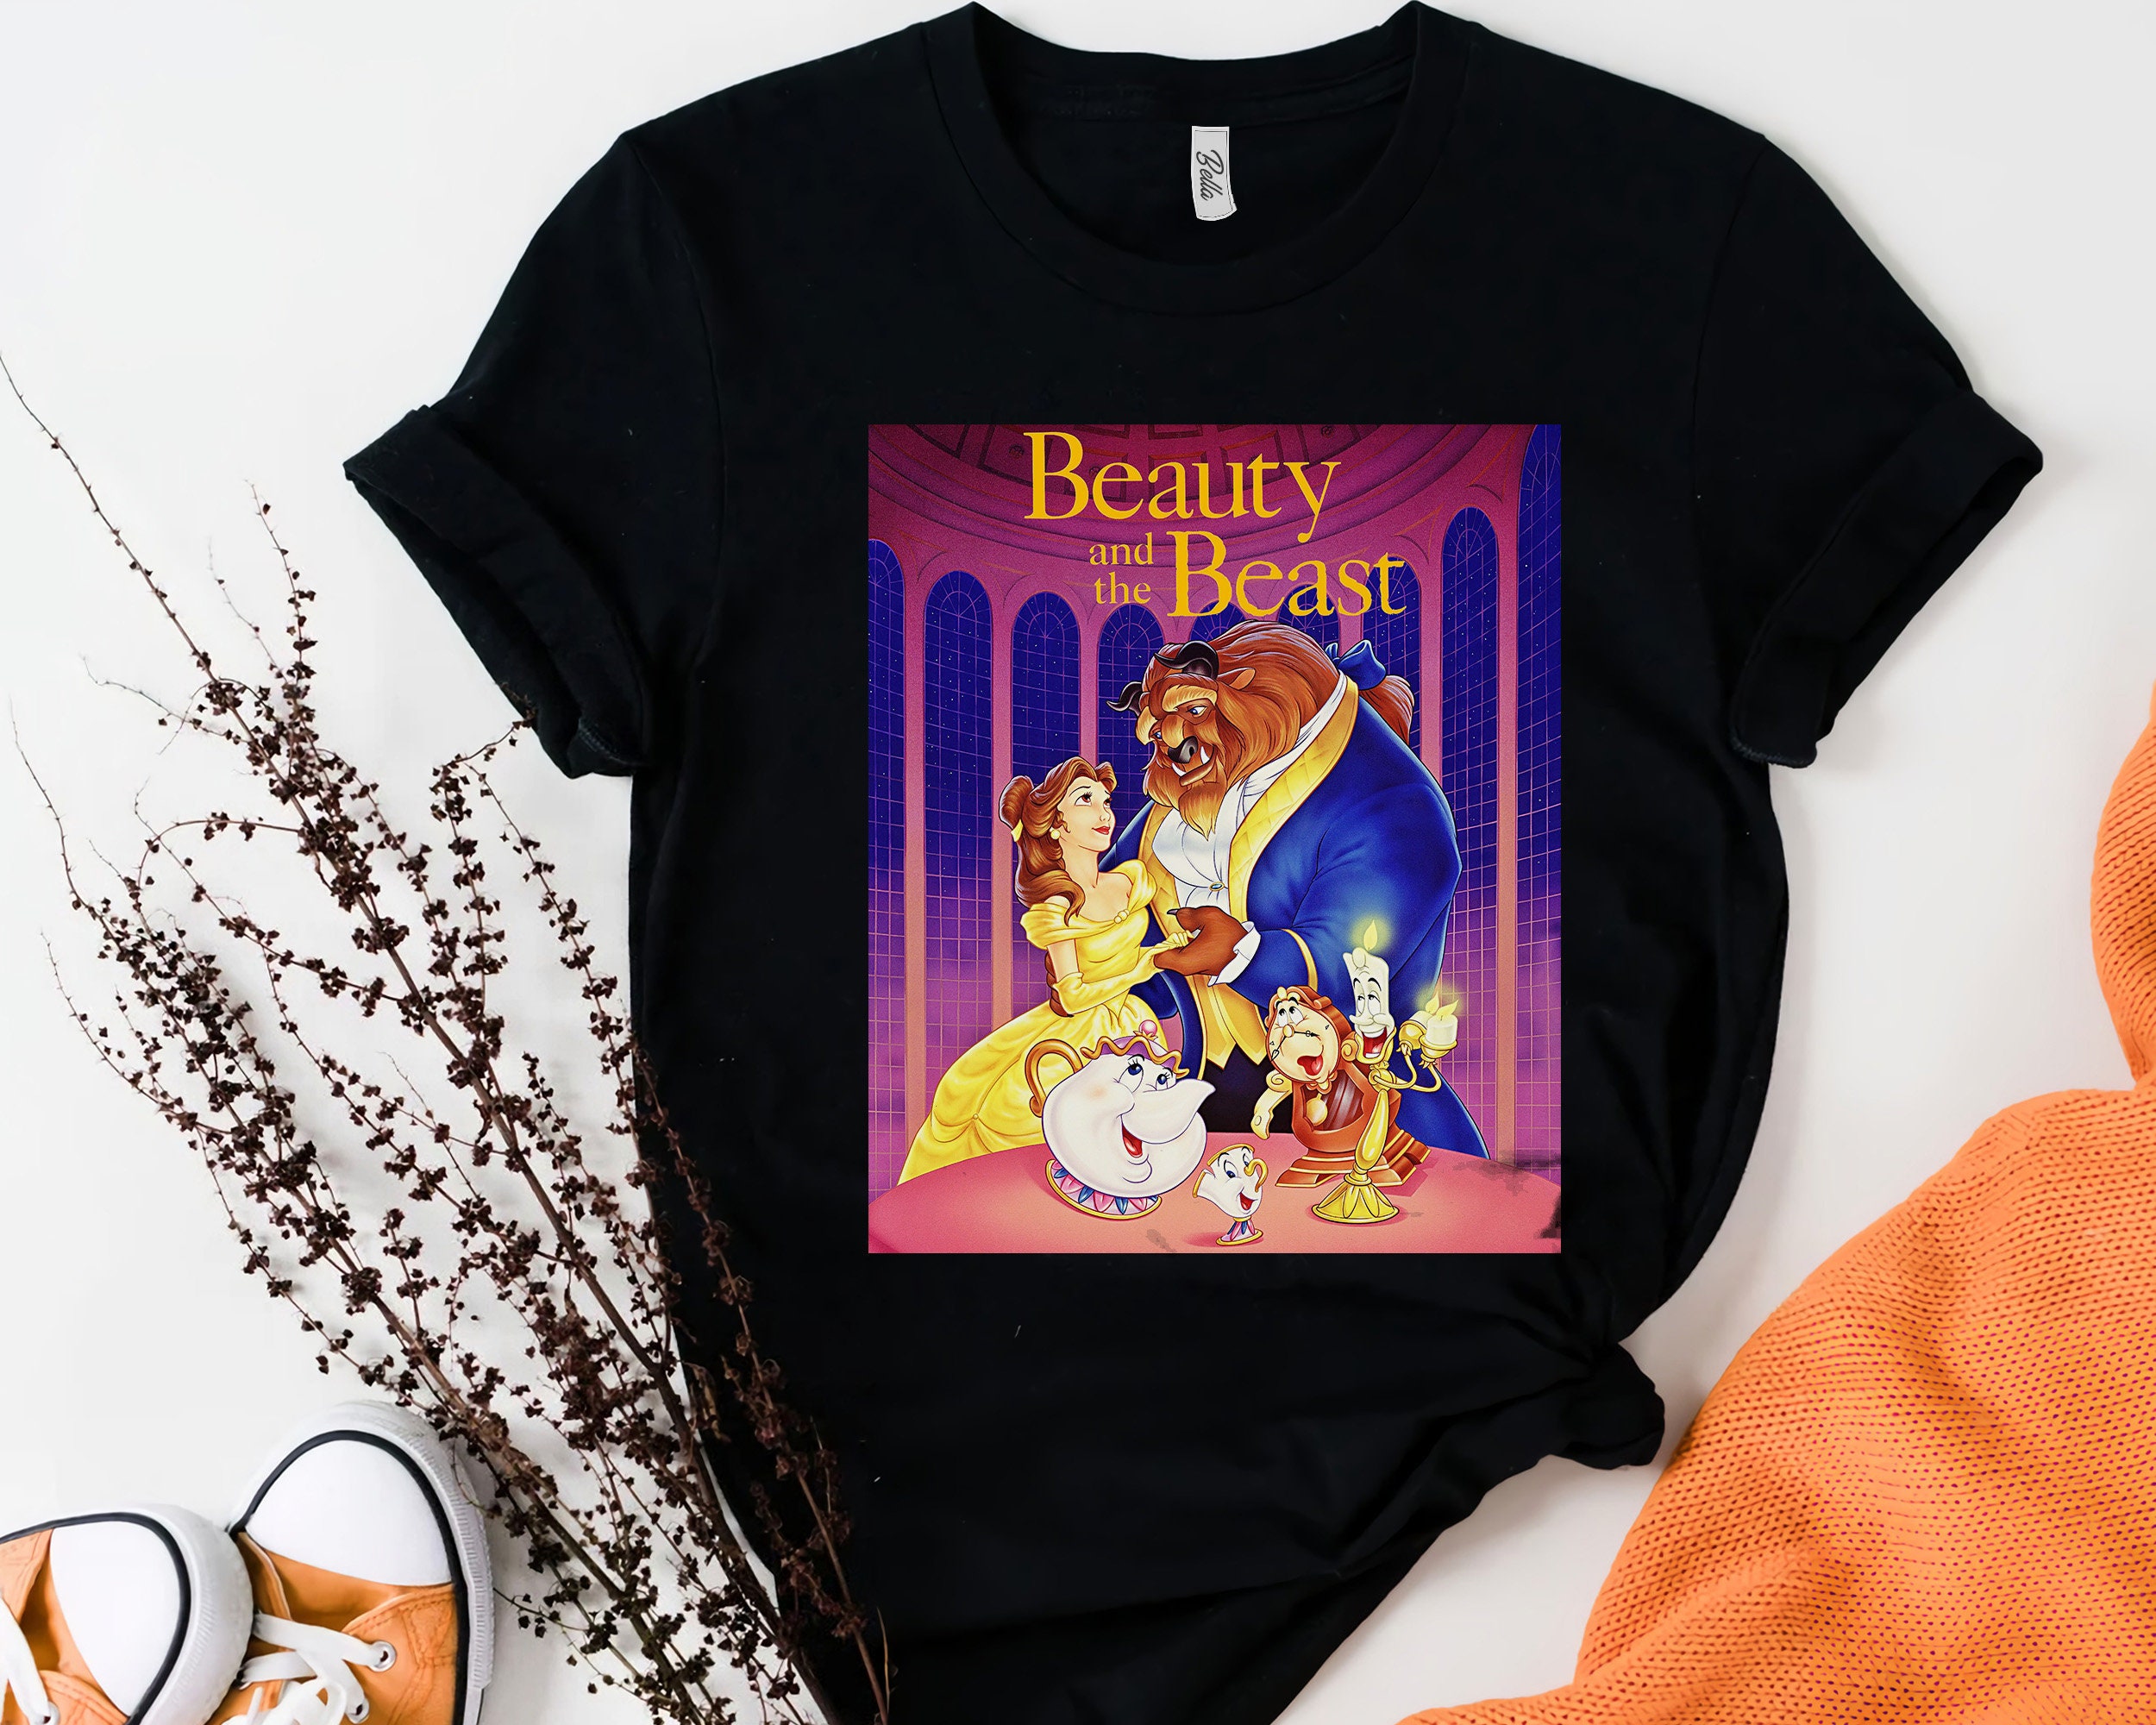 Discover Disney Beauty And The Beast Poster Vintage Group Shot T-Shirt Unisex Adult T-shirt Kid shirt Gift for Birthday Hoodie Sweatshirt Toddler Tee